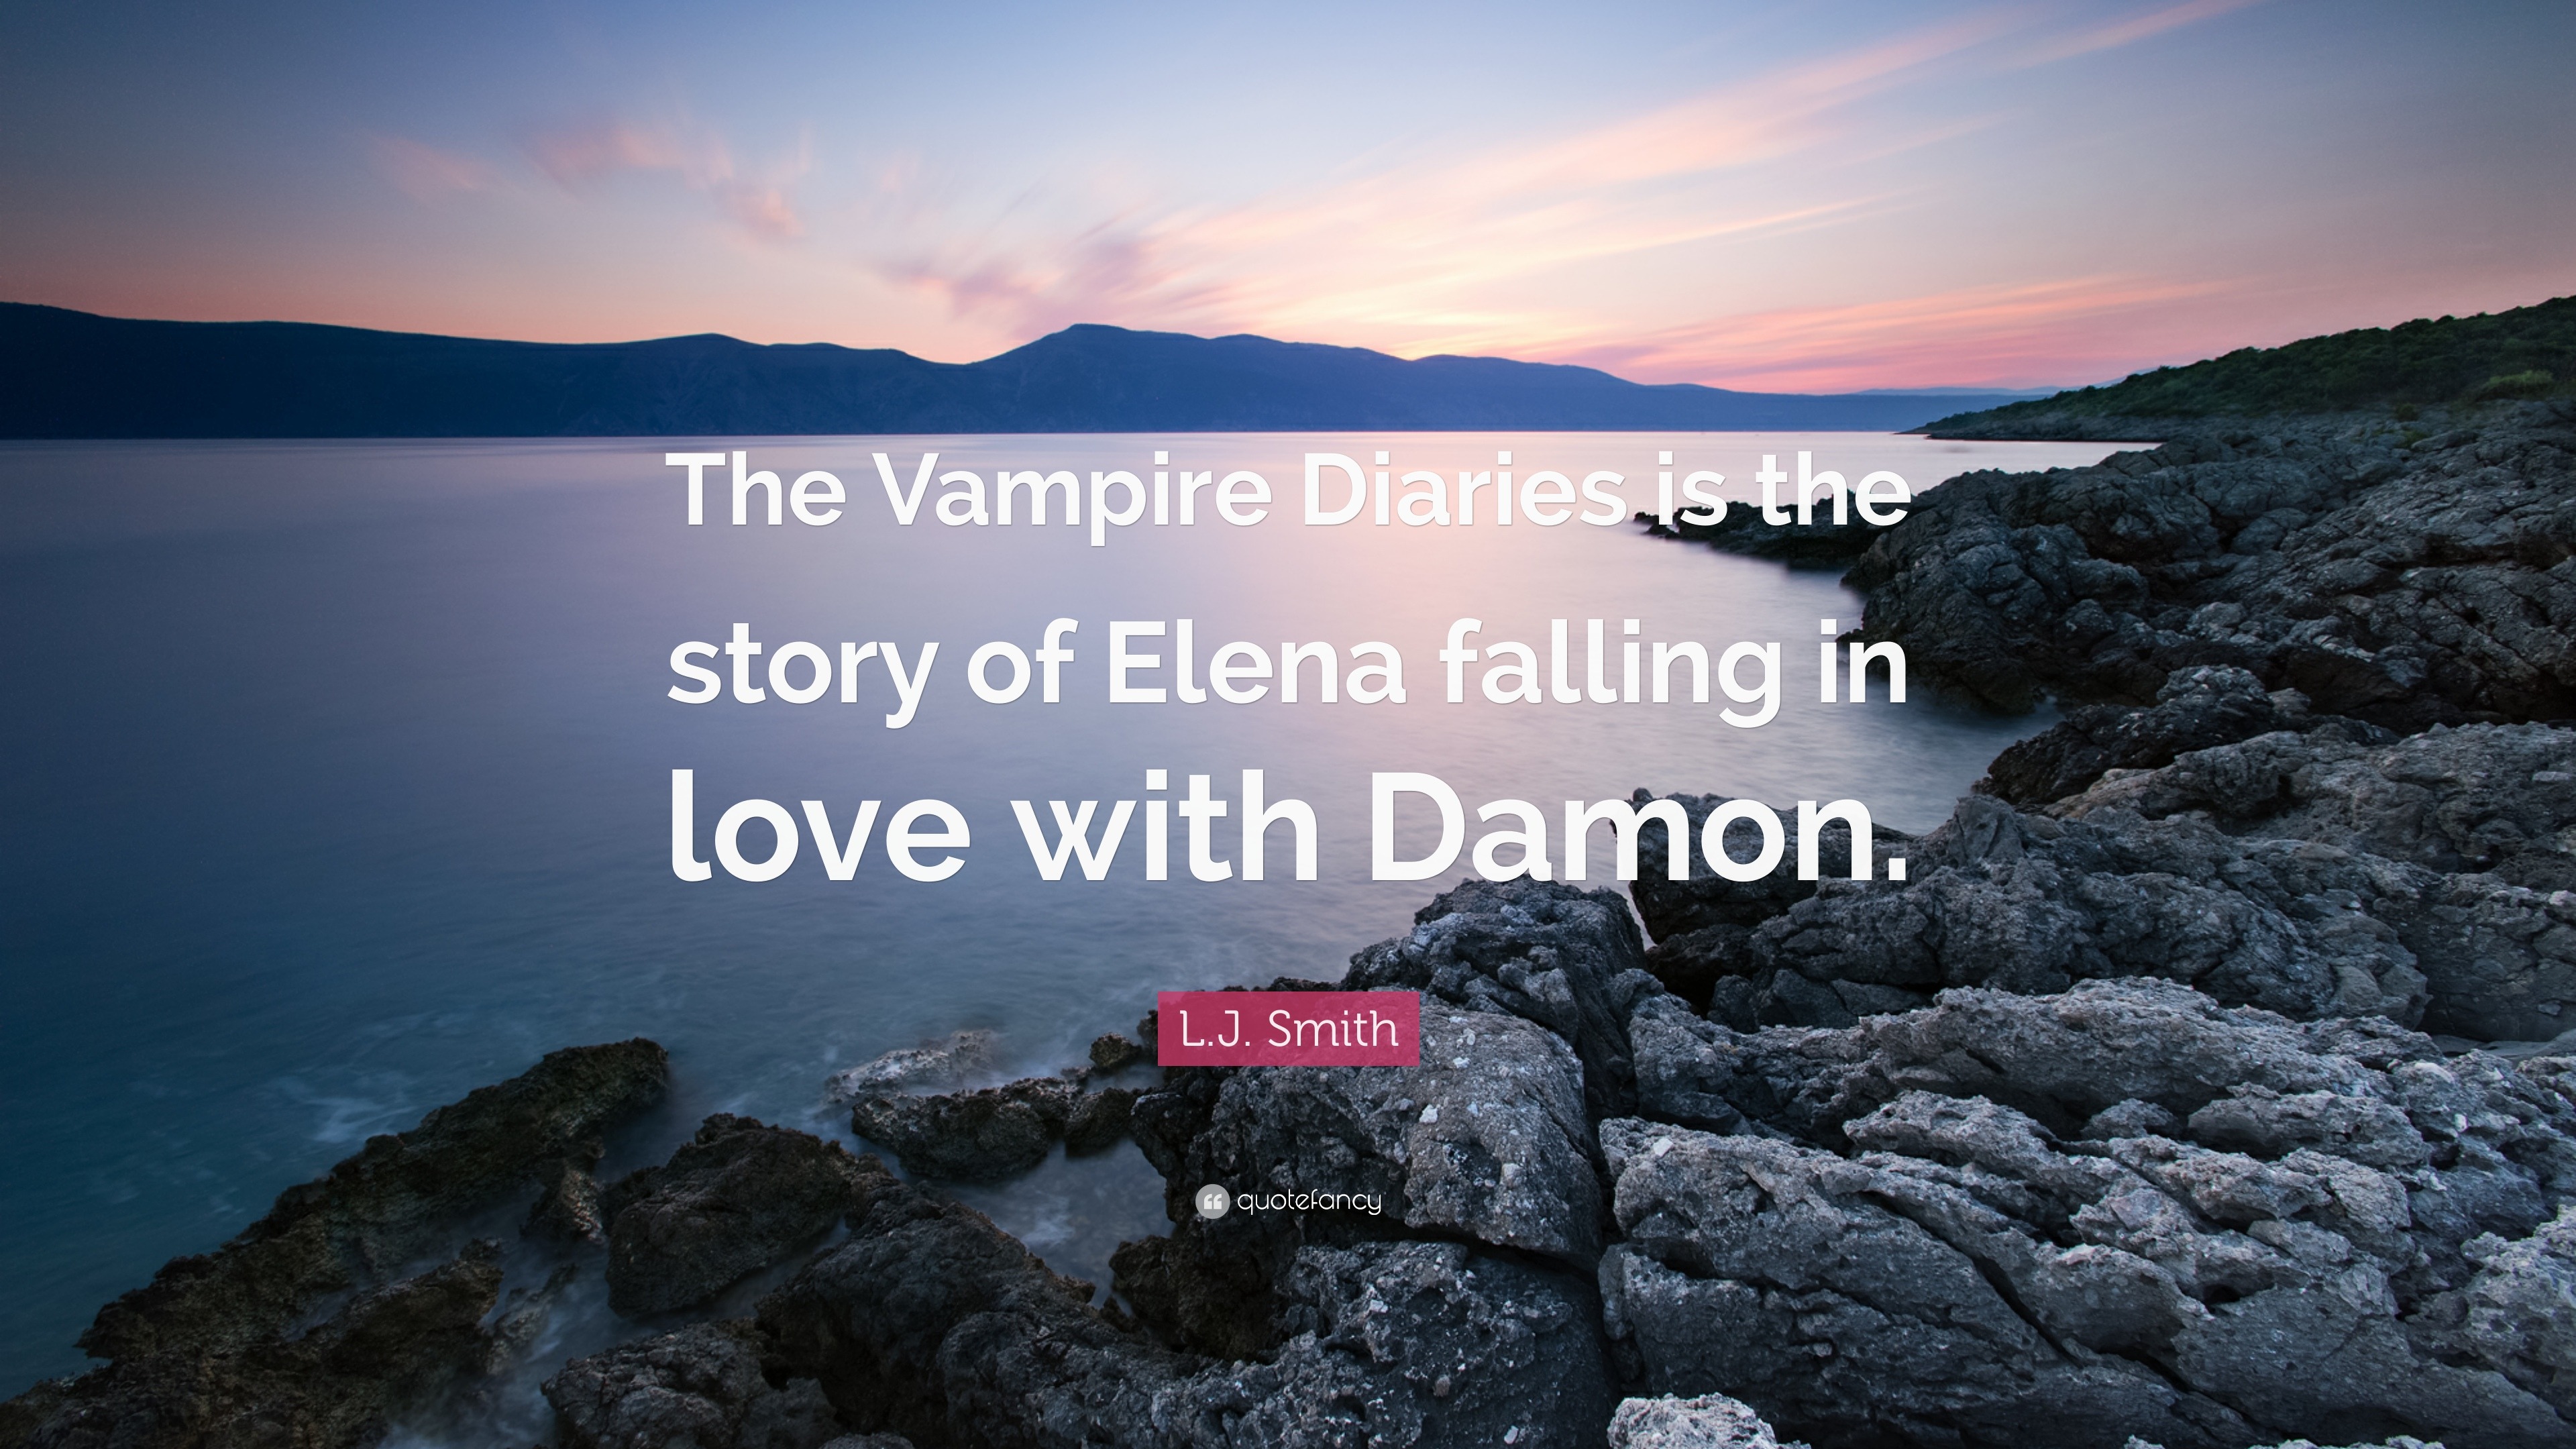 L.J. Smith Quote: “The Vampire Diaries is the story of Elena falling in  love with Damon.”